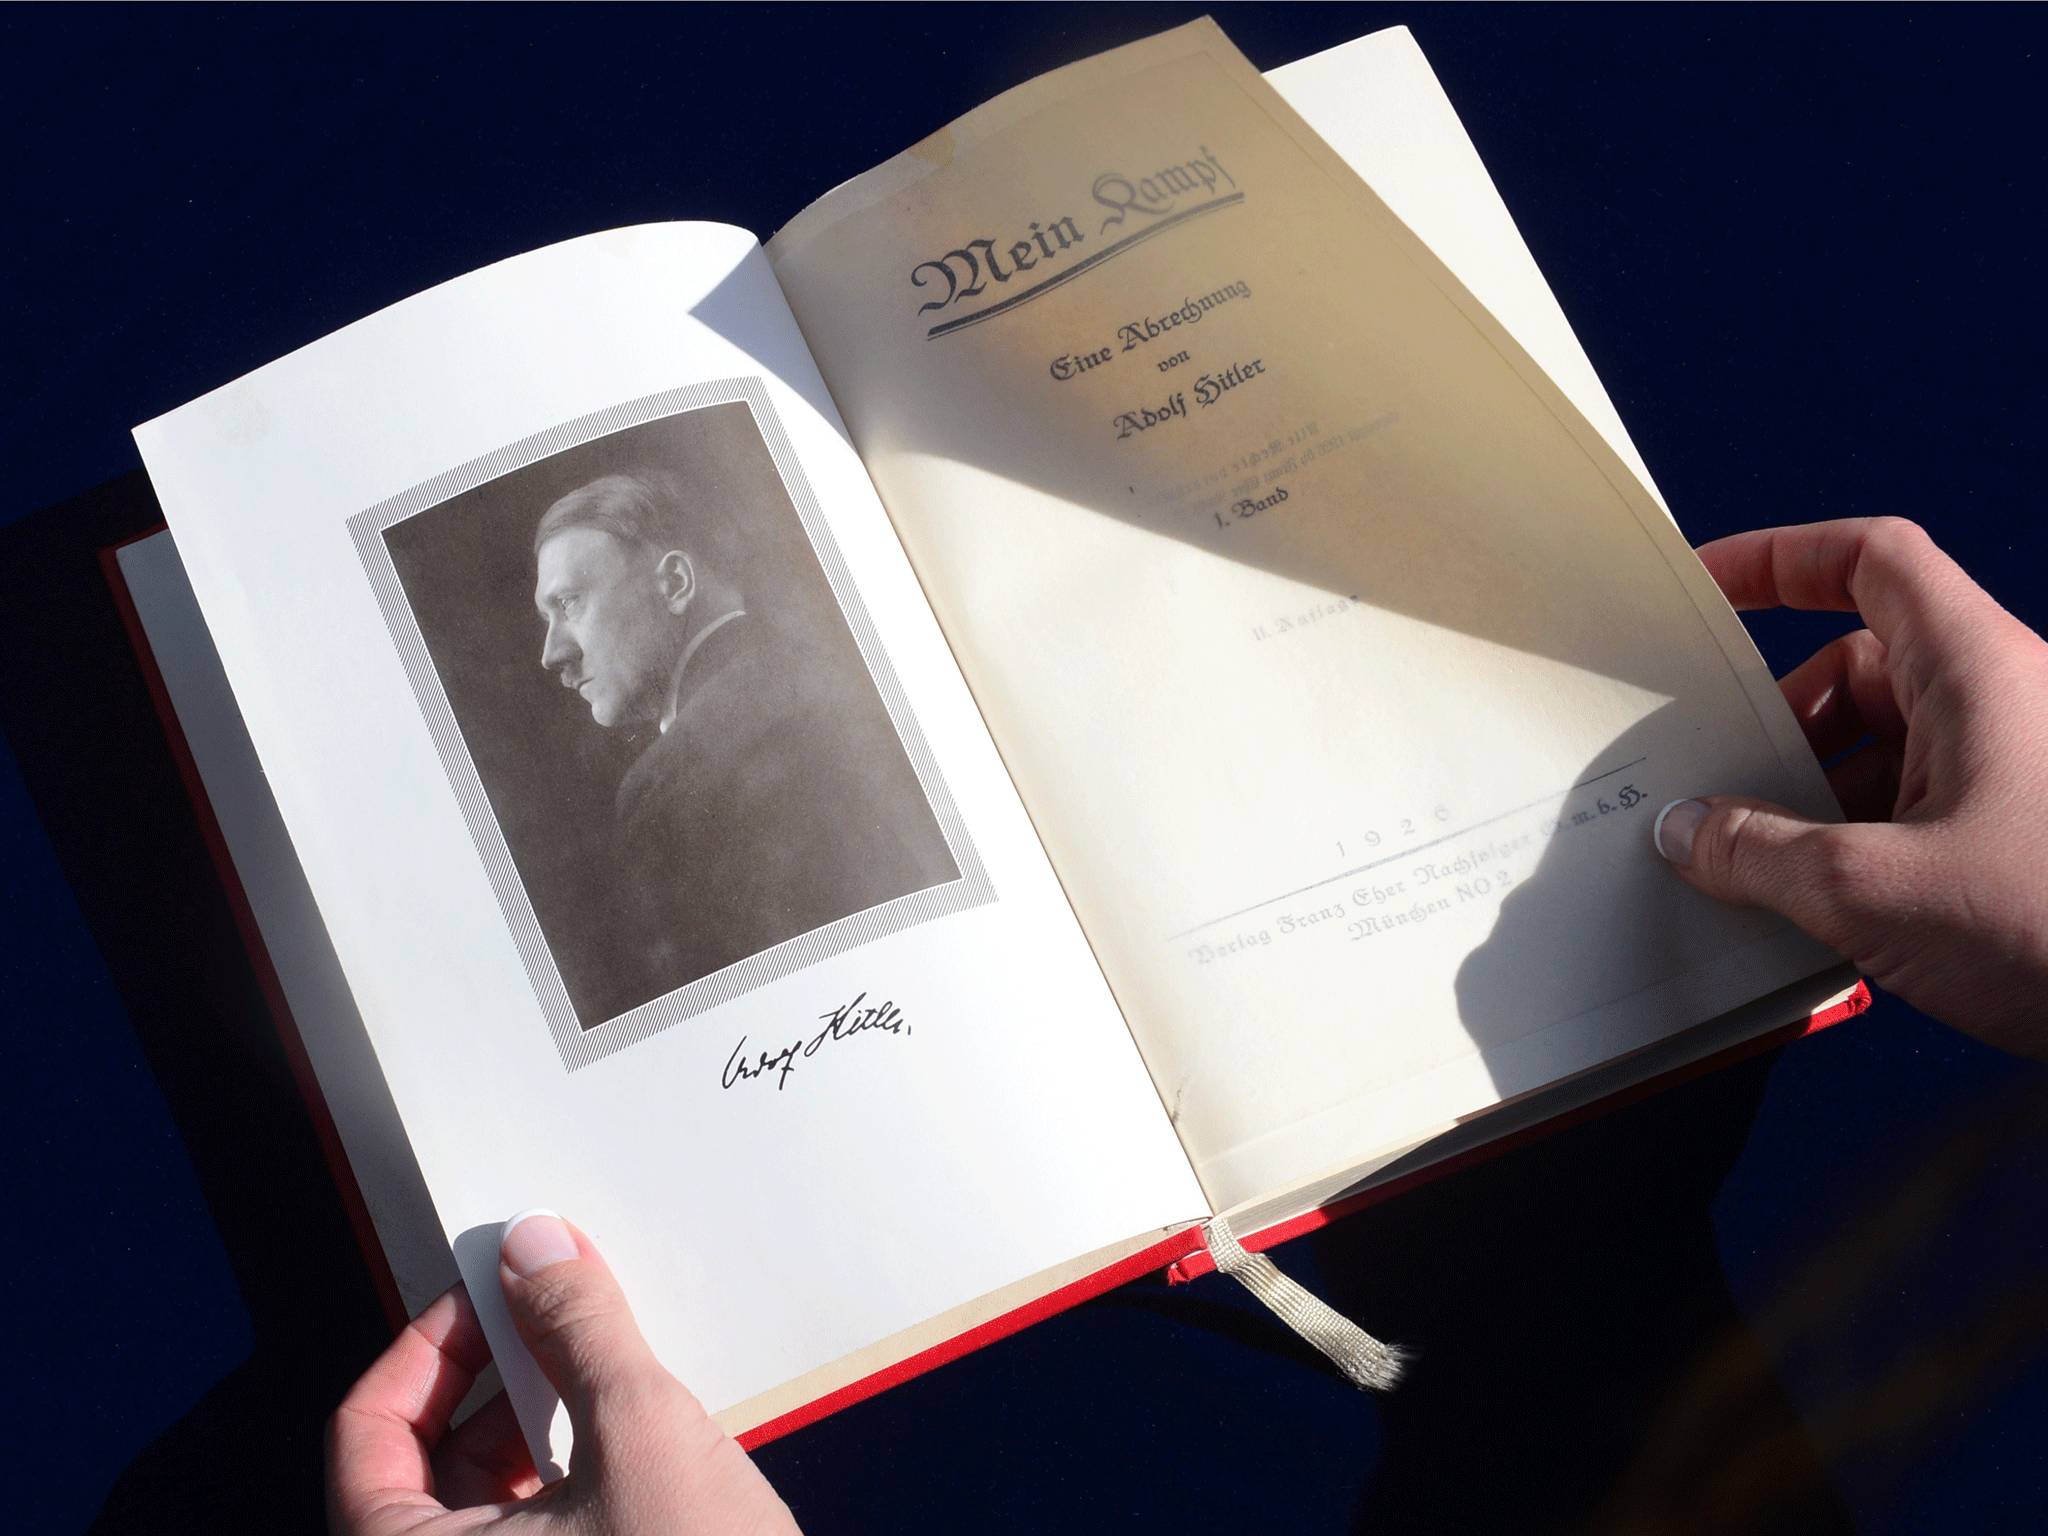 A signed copy of Mein Kampf which Hitler gave to an SS officer as a Christmas gift